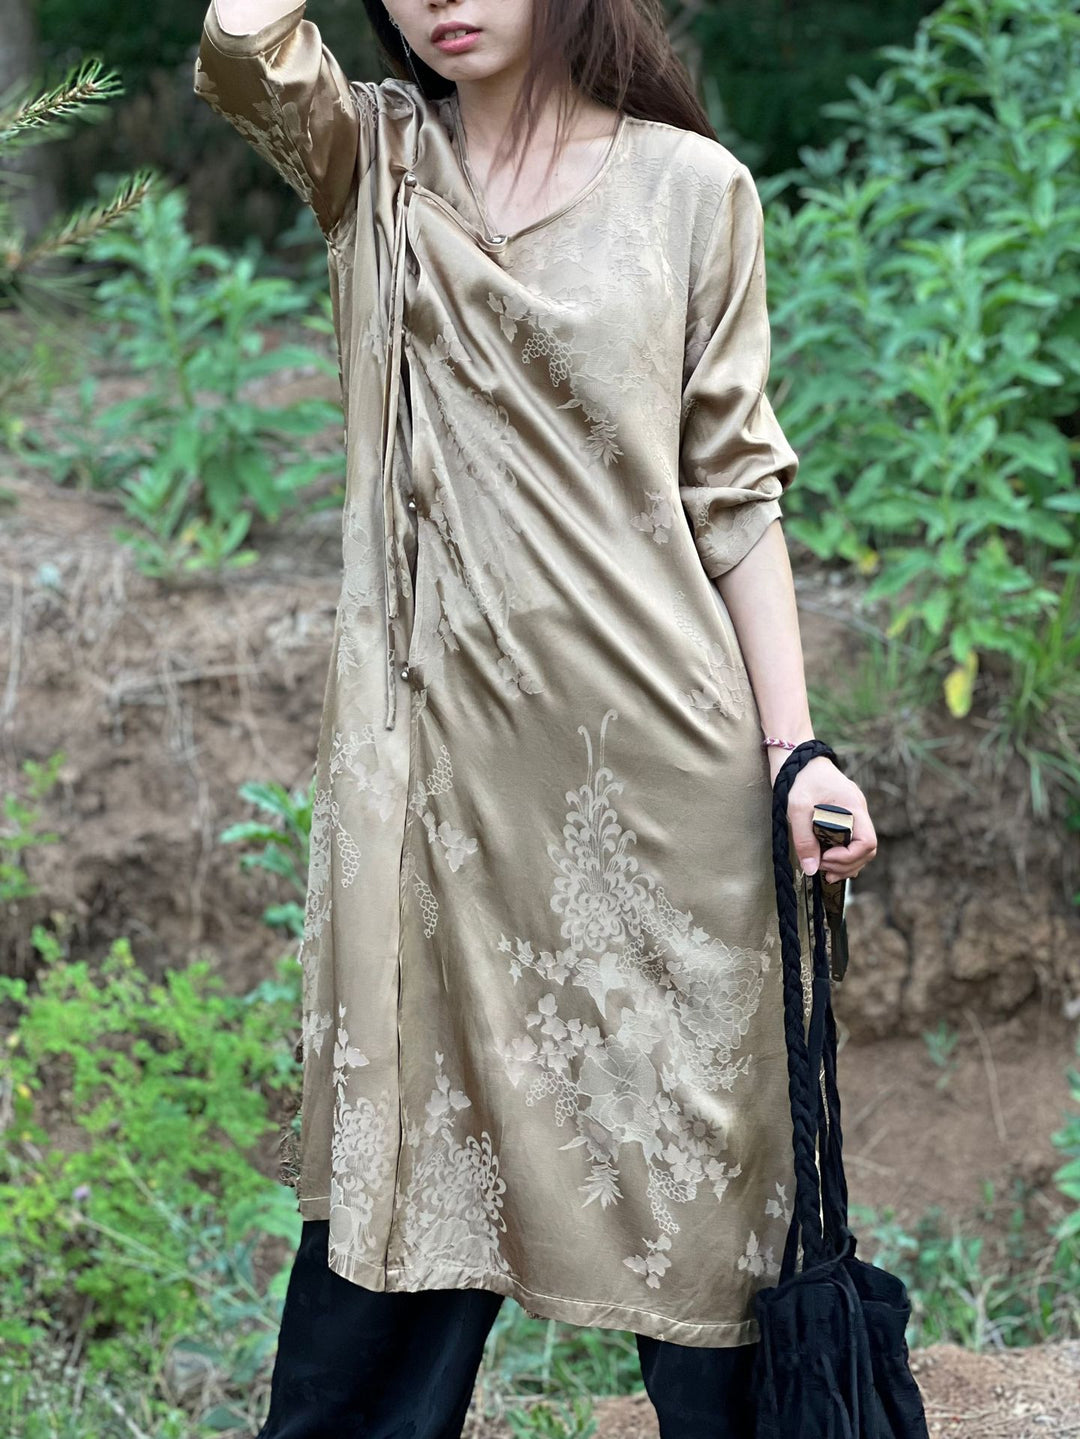 The Dao 道 of Zen Floral Jacquard Cardigan • Silky Cheongsam • Long Shirt Dress • Áo Dài Qigong Robe • Cooling, Breathable Air Flow, Perfect Temperature • Silky Tencel Lyocell • Sunscreen Layer